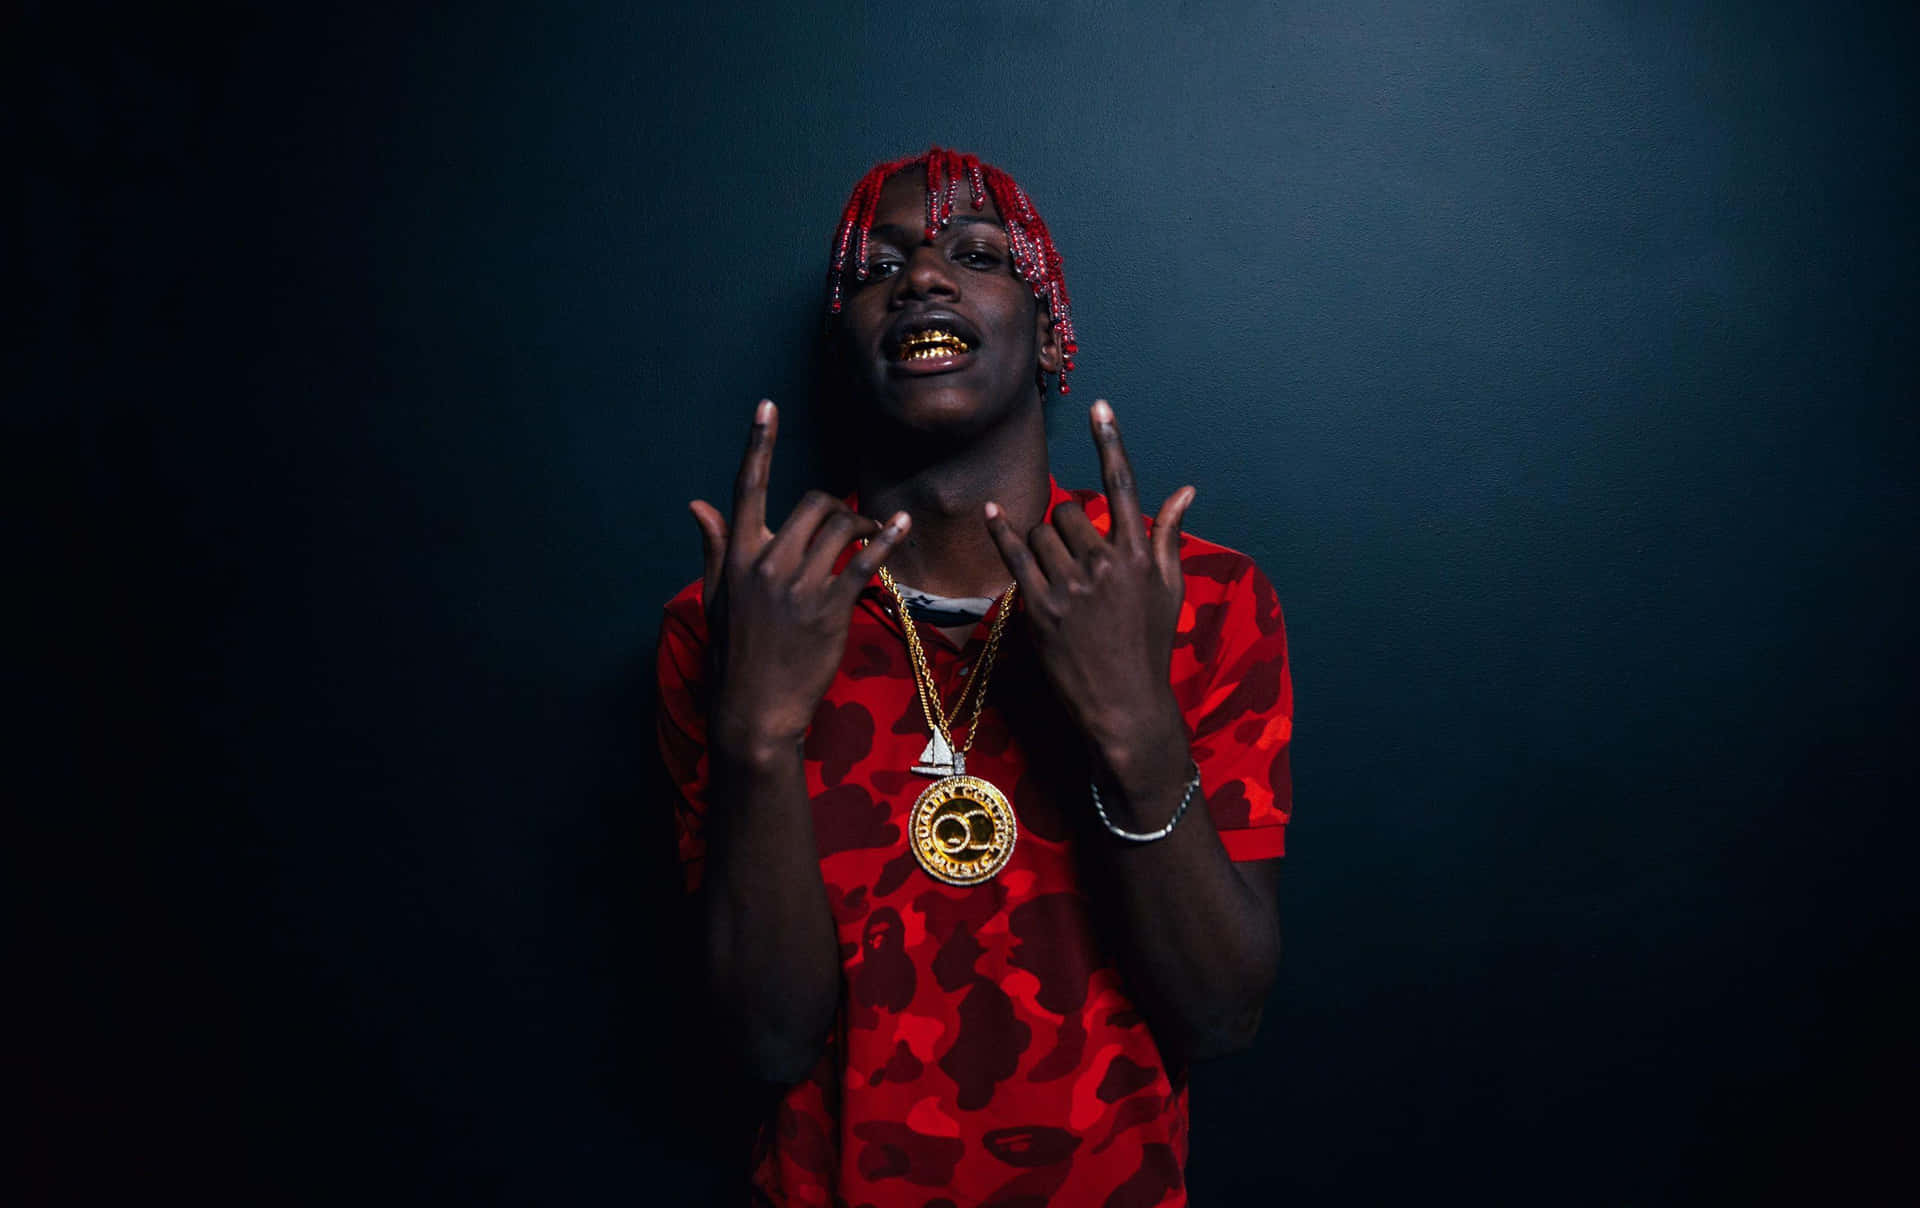 "Lil Yachty takes center stage at a live performance" Wallpaper